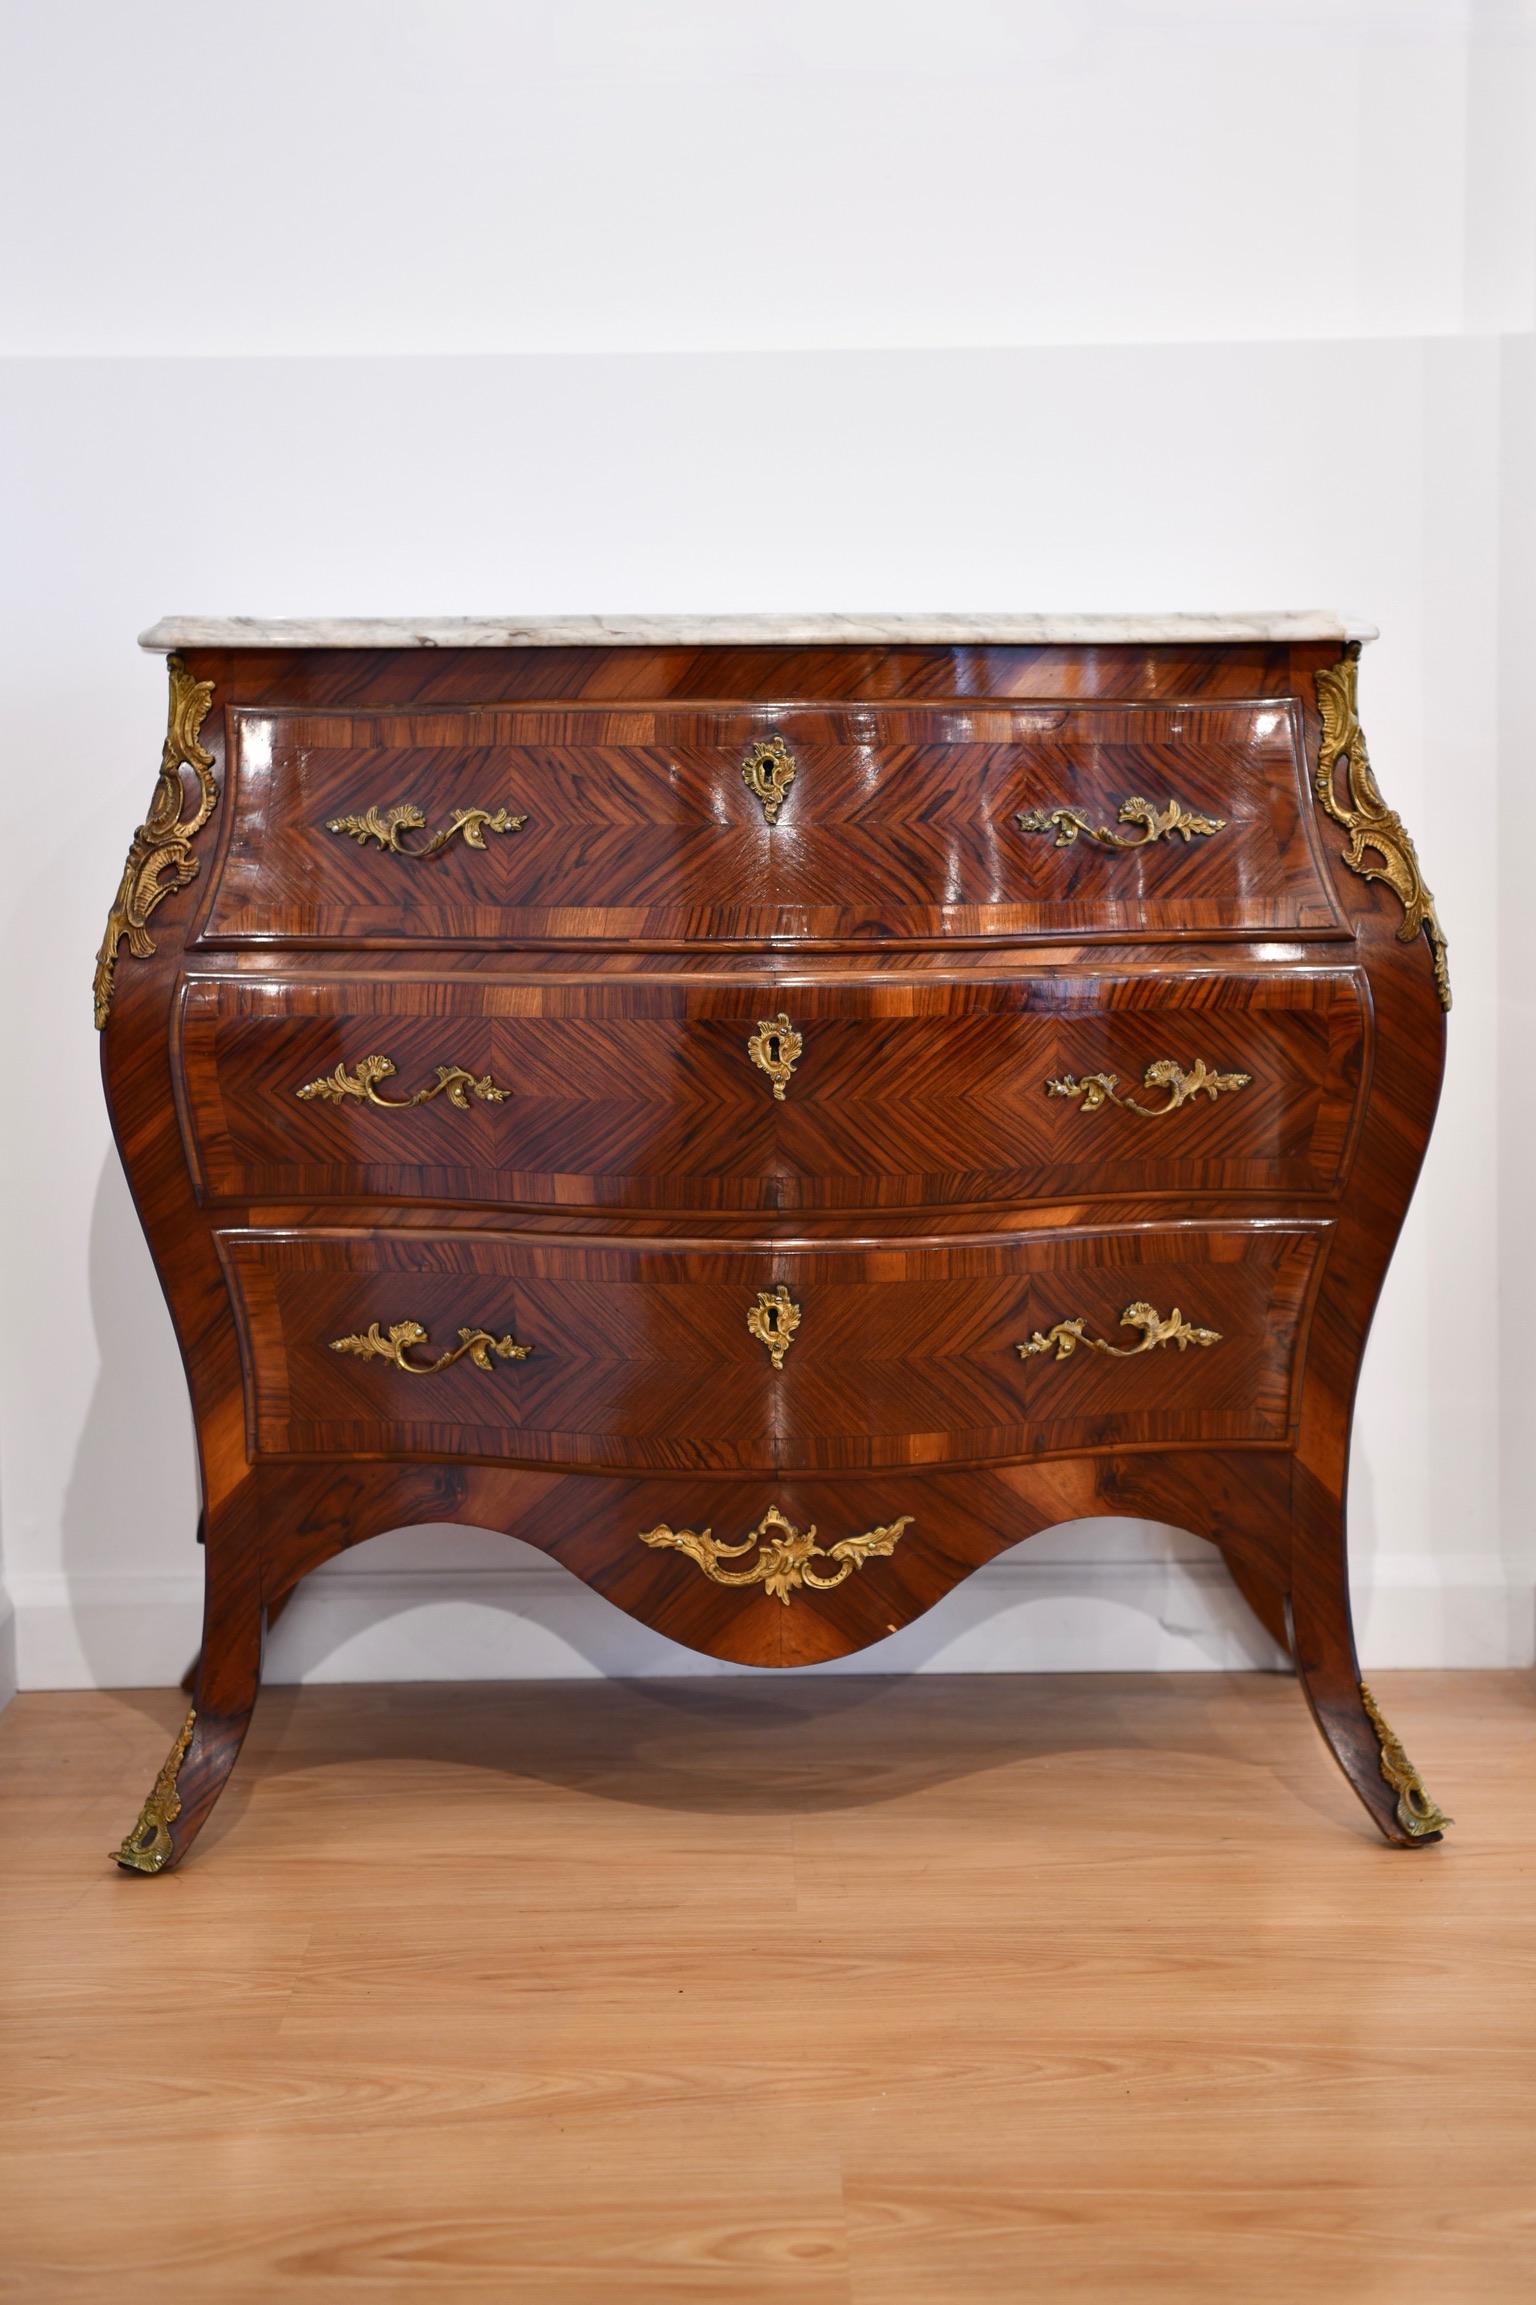 Rare Louis XV style bronze mounted marble top and kingwood bombe commode. Some surface level imperfections and scratches to marble, pictured; otherwise, in good condition. Two available, sold individually. Dimensions: 32